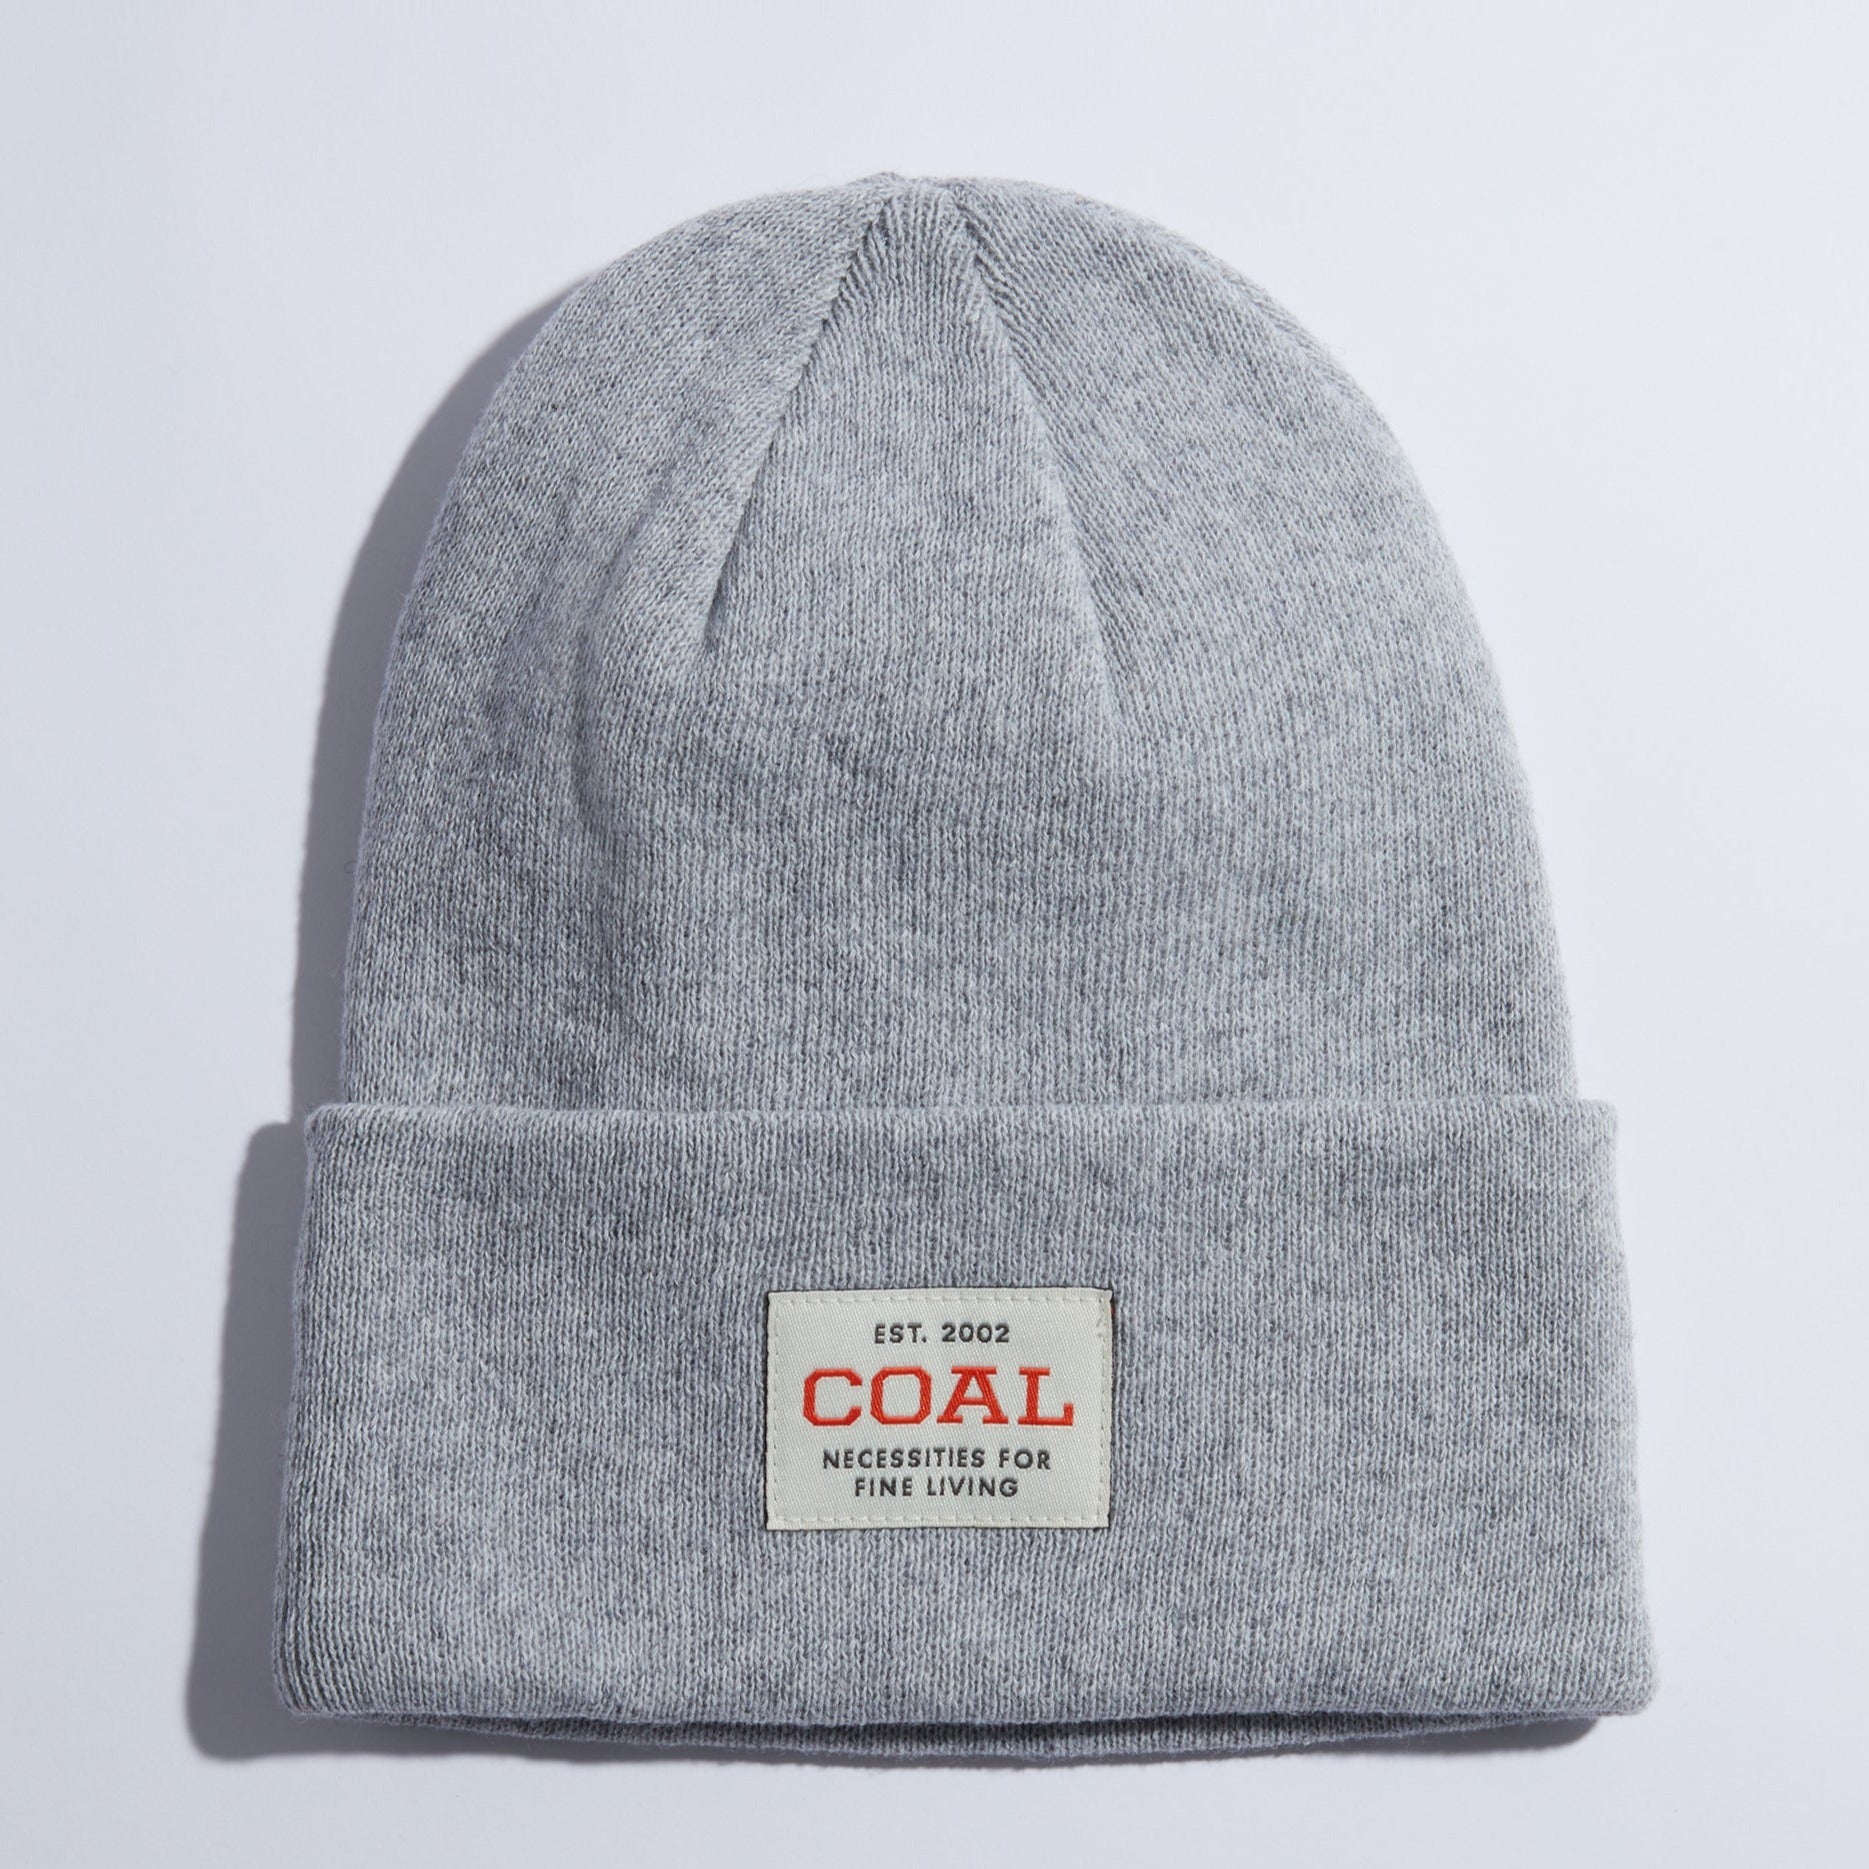 The Recycled Wool Uniform Knit Cuff Beanie